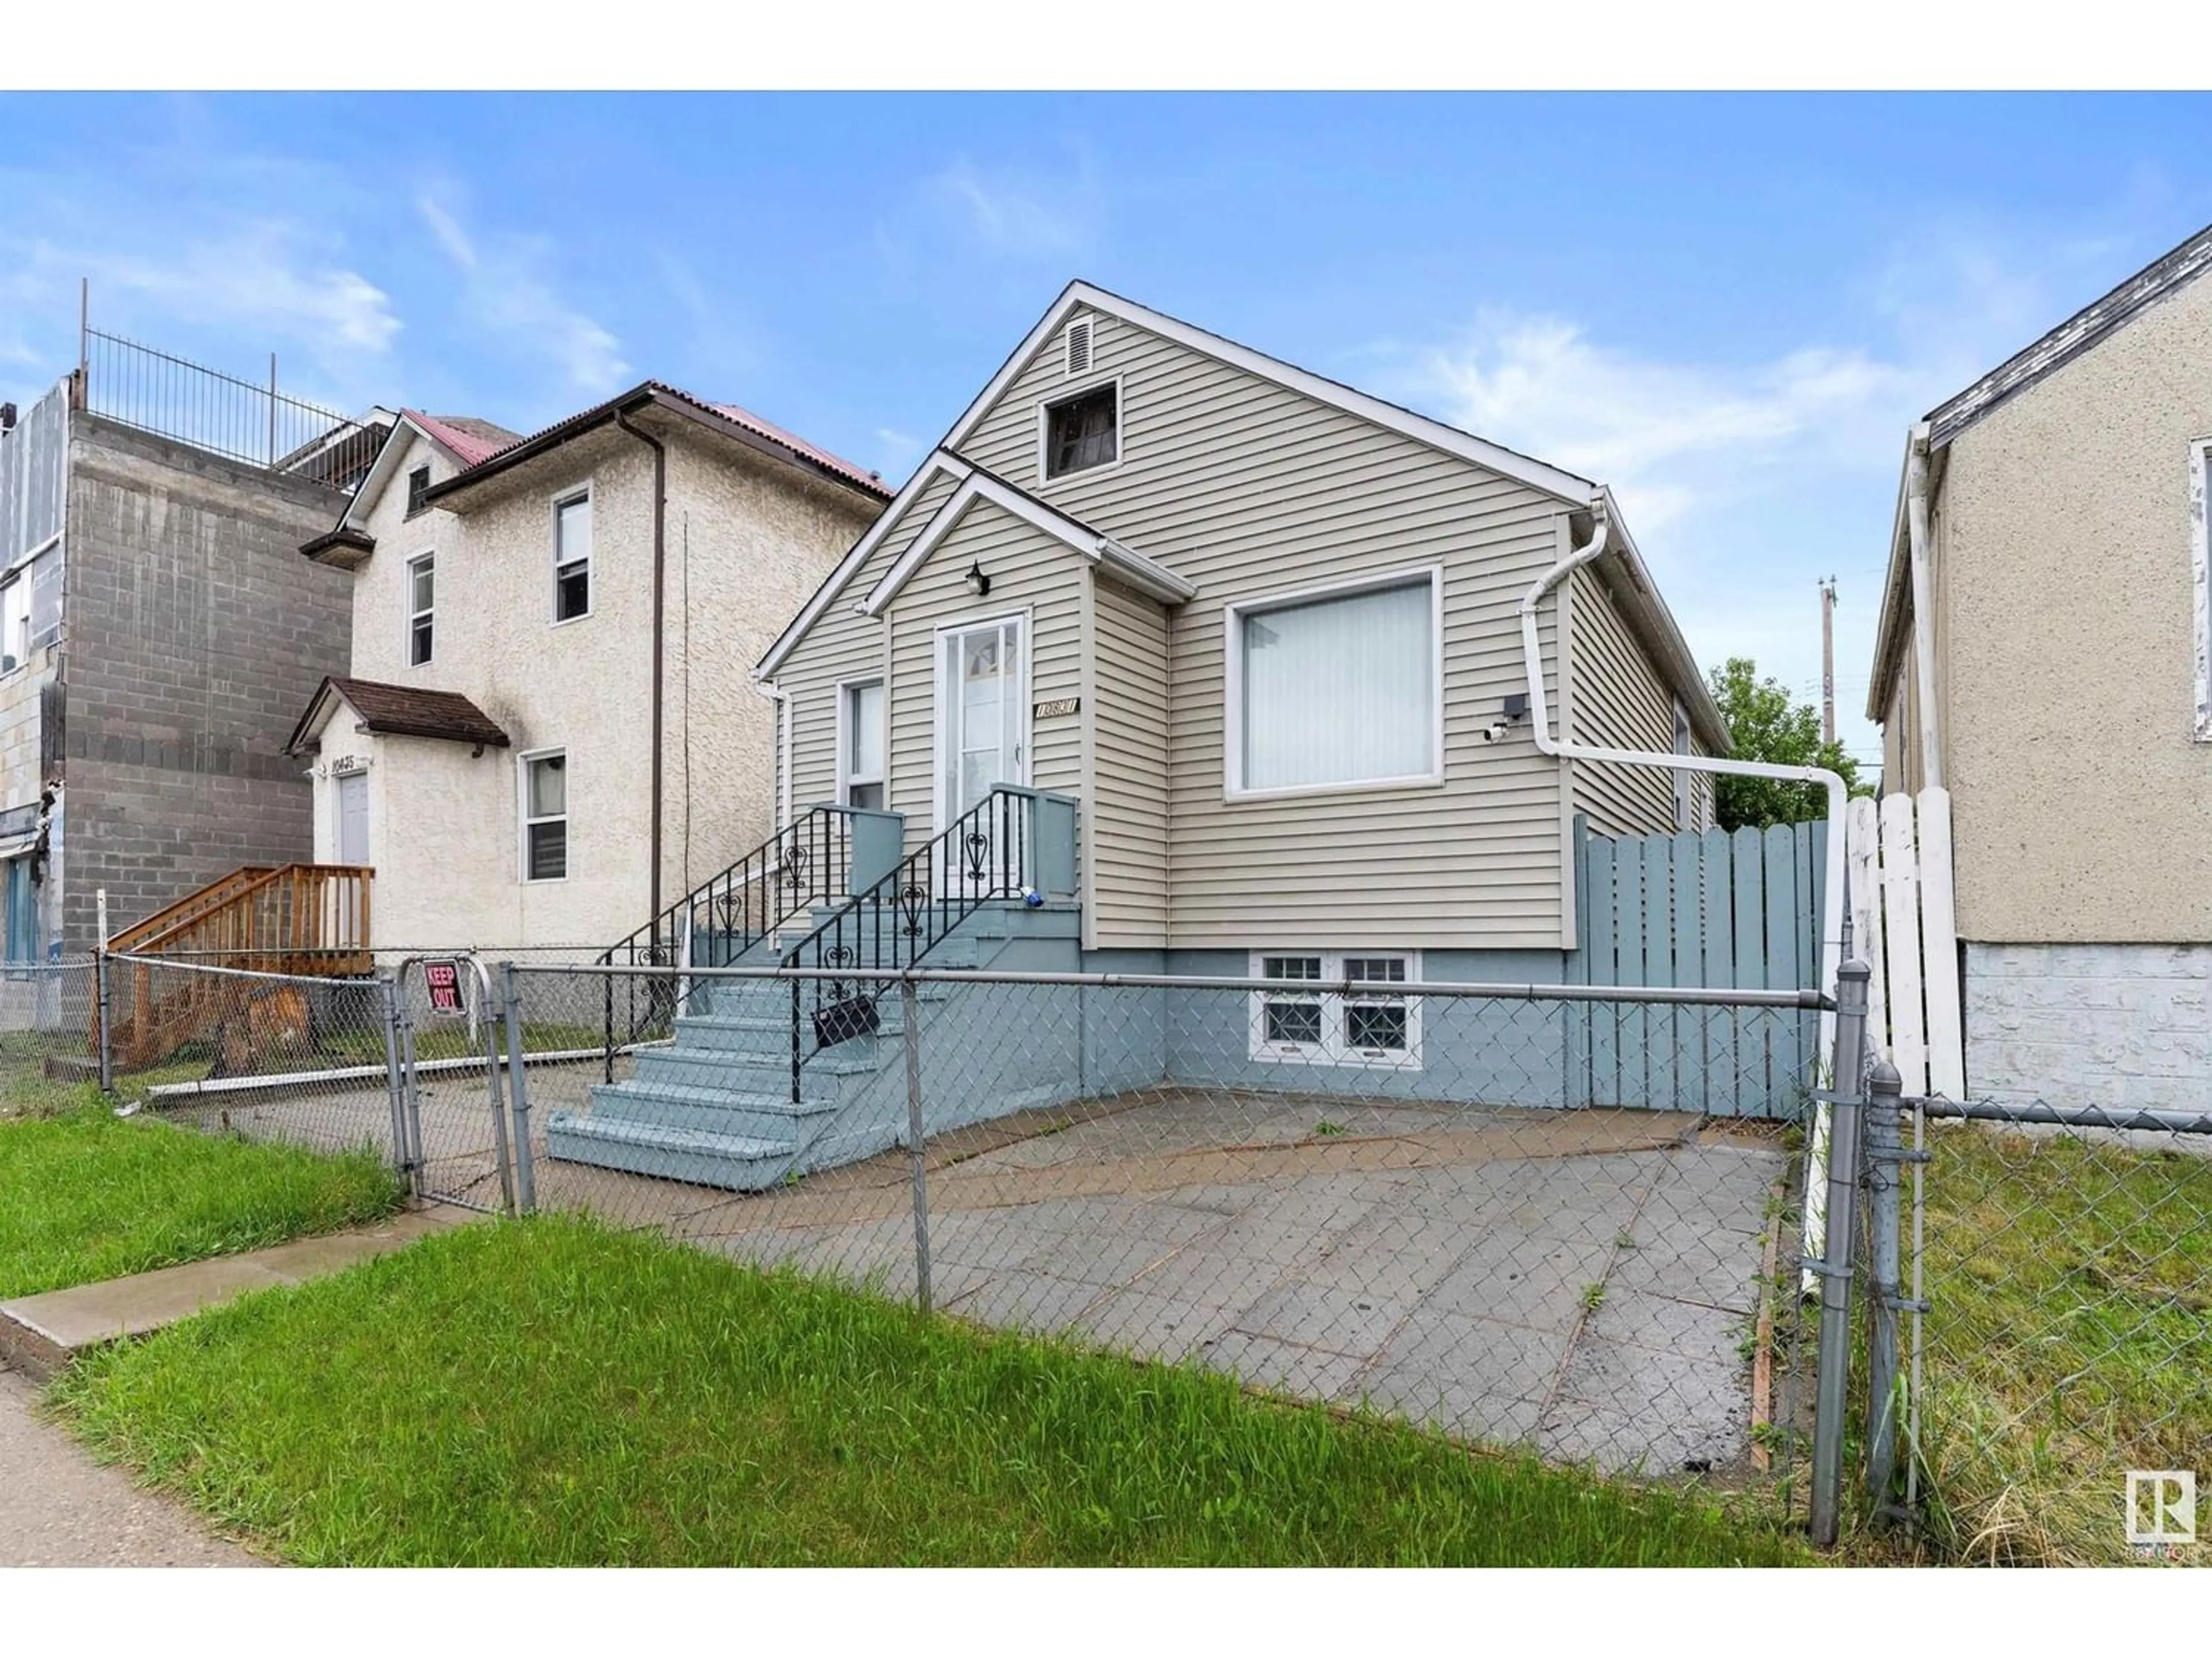 Frontside or backside of a home for 10831 98 ST NW, Edmonton Alberta T5H2P3